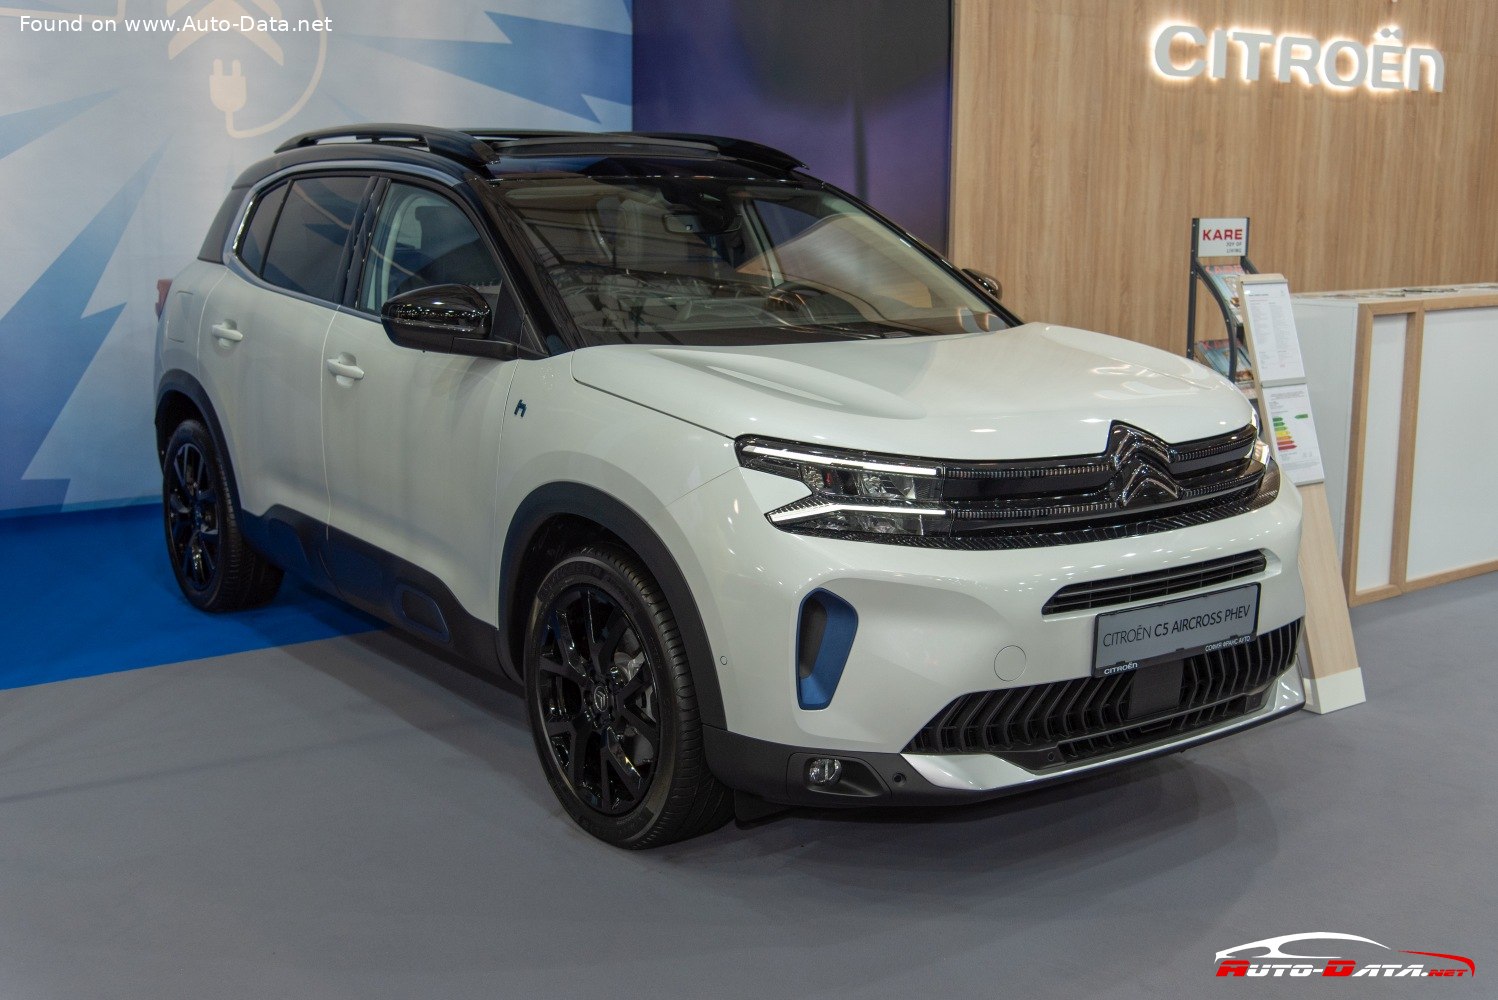 2022 Citroen C5 Aircross (facelift 2022) 1.6 (225 Hp) Plug-in Hybrid  Automatic